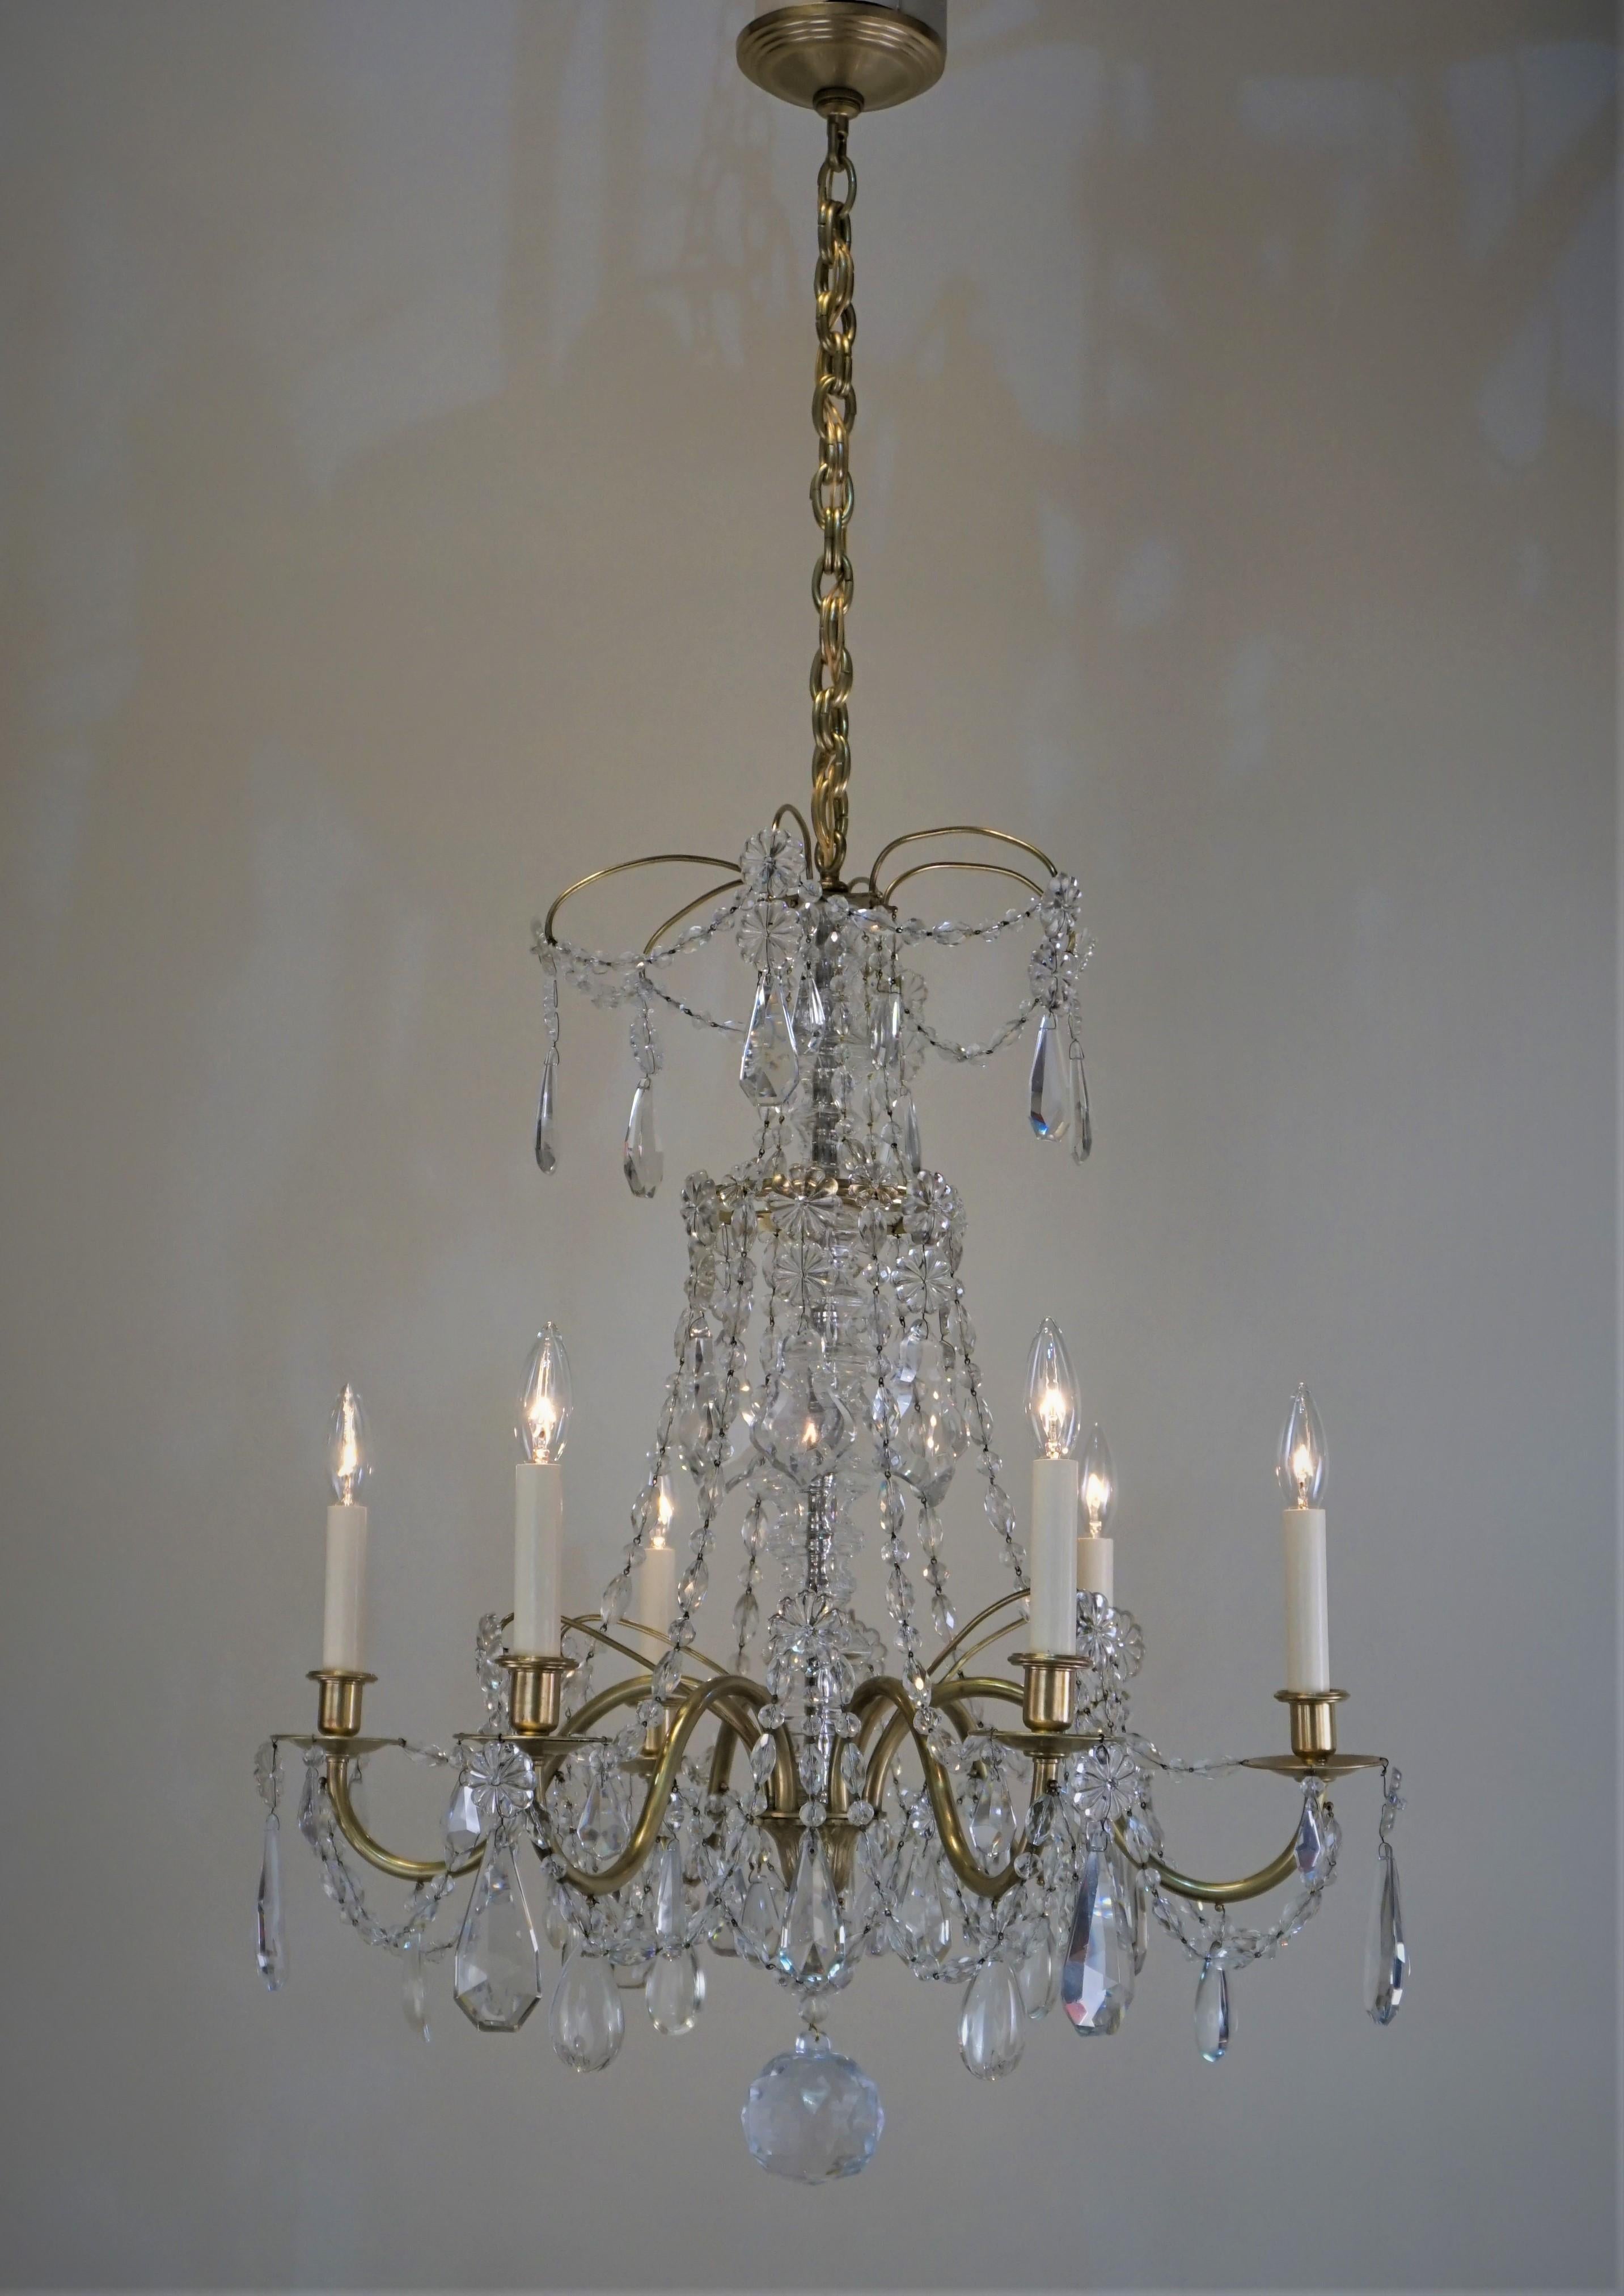 1920s six arm cut crystal and bronze chandelier by Maison Baguès. The elegant and detailed bronze frame, with heavy high quality cut crystals.
Minimum height fully installed is 36